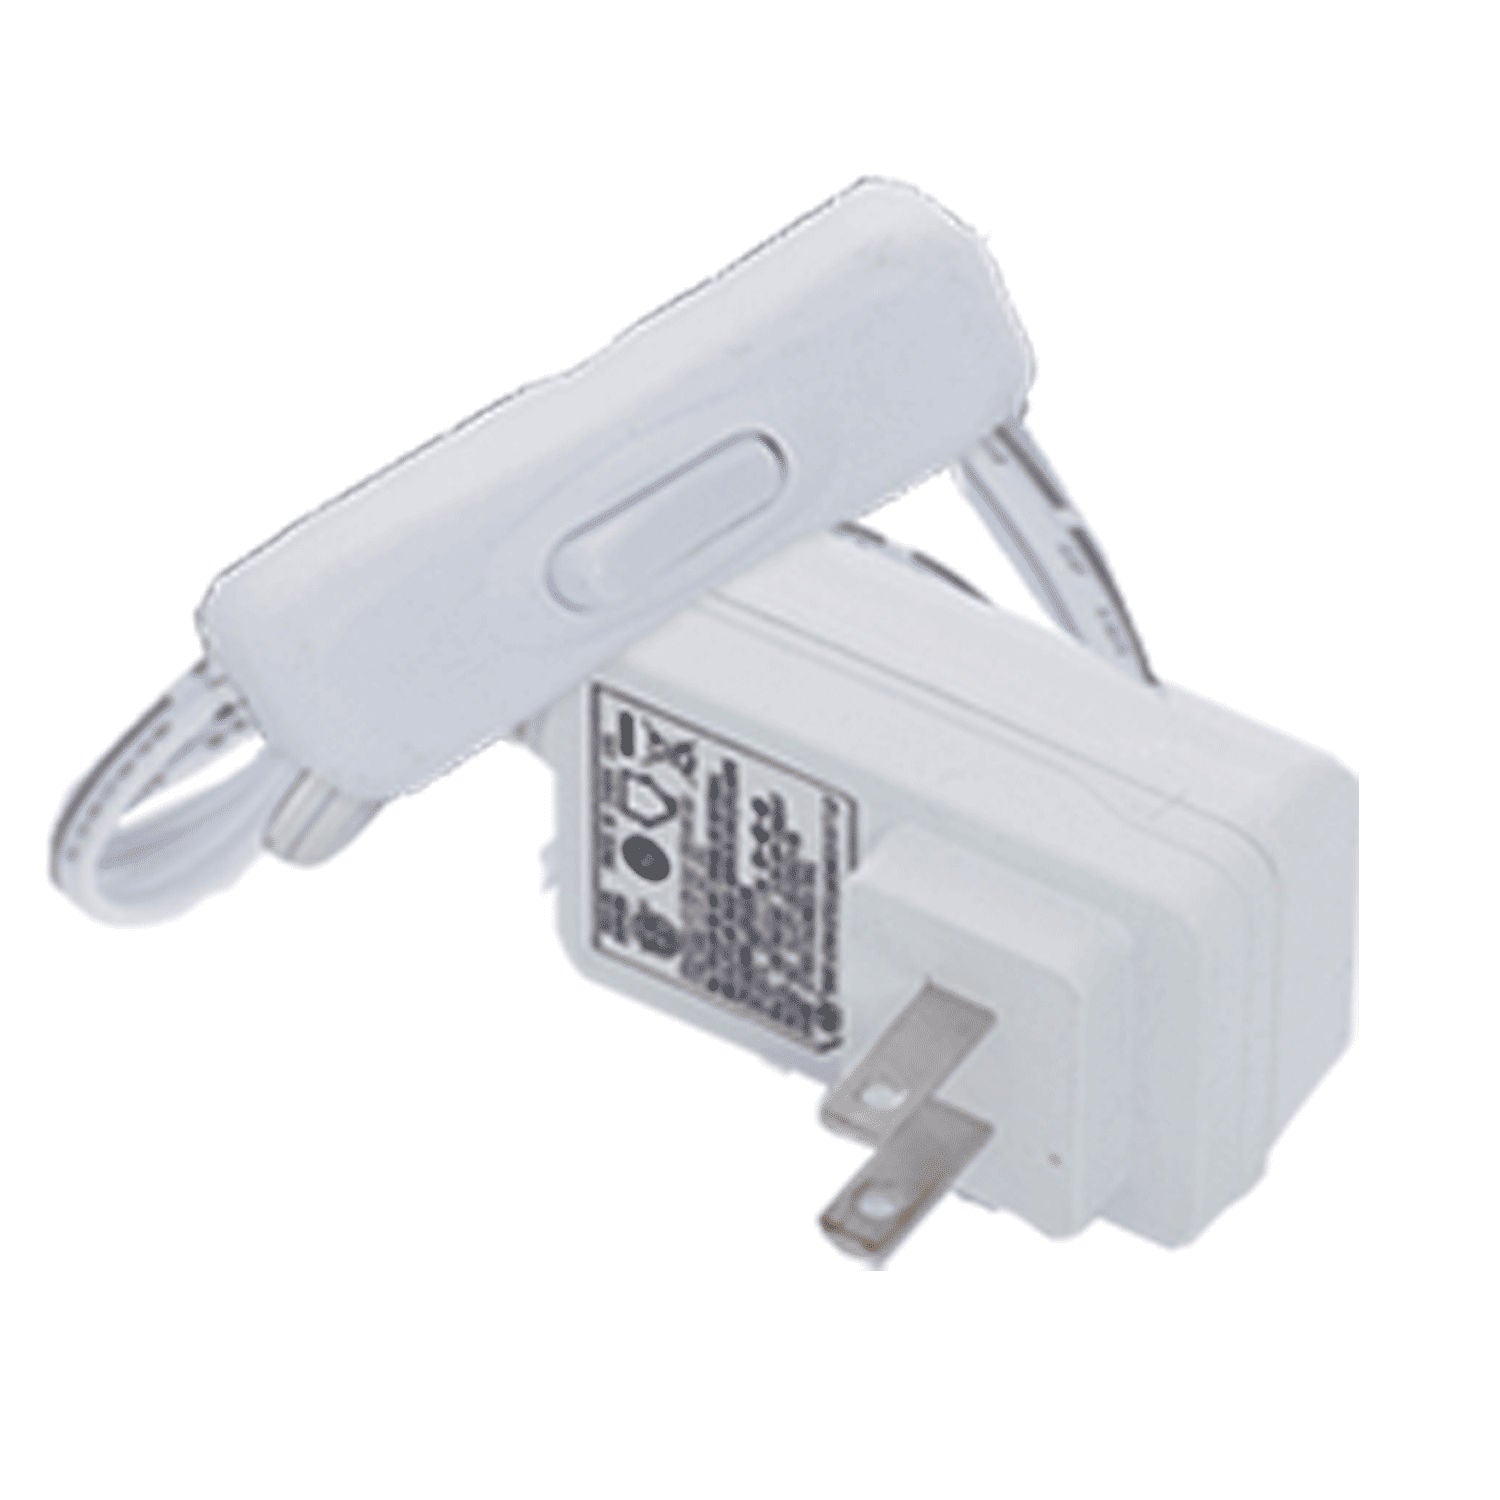 Westgate PL12-PIDR-12W-WH 12W Plug-in Driver For Puck/Strip Light - White